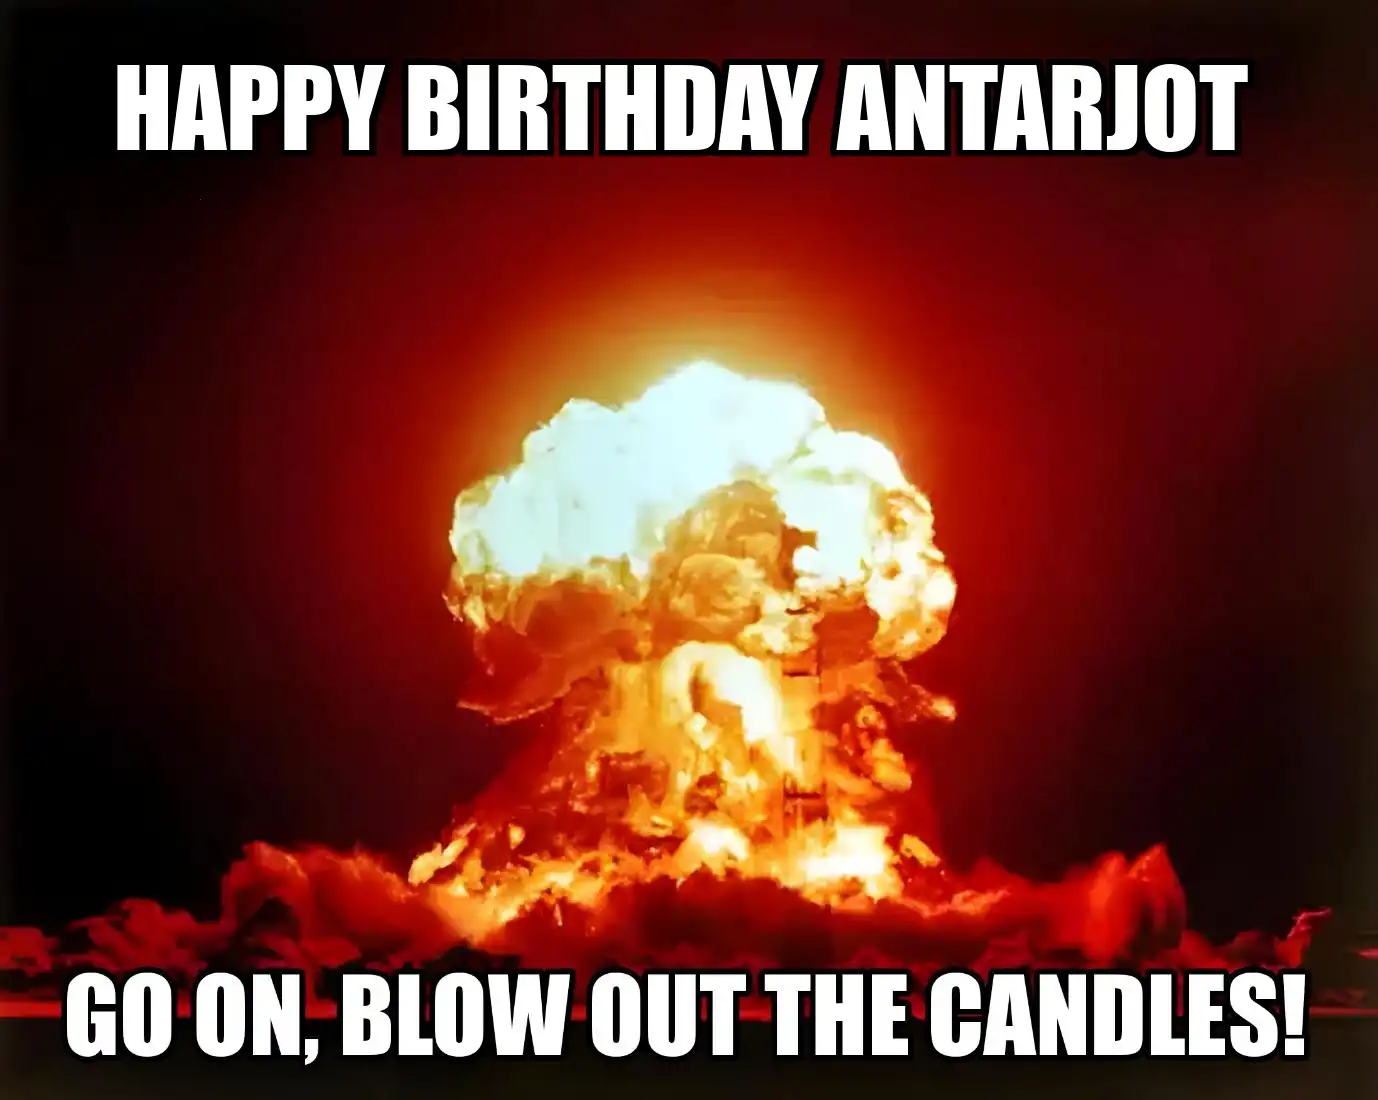 Happy Birthday Antarjot Go On Blow Out The Candles Meme